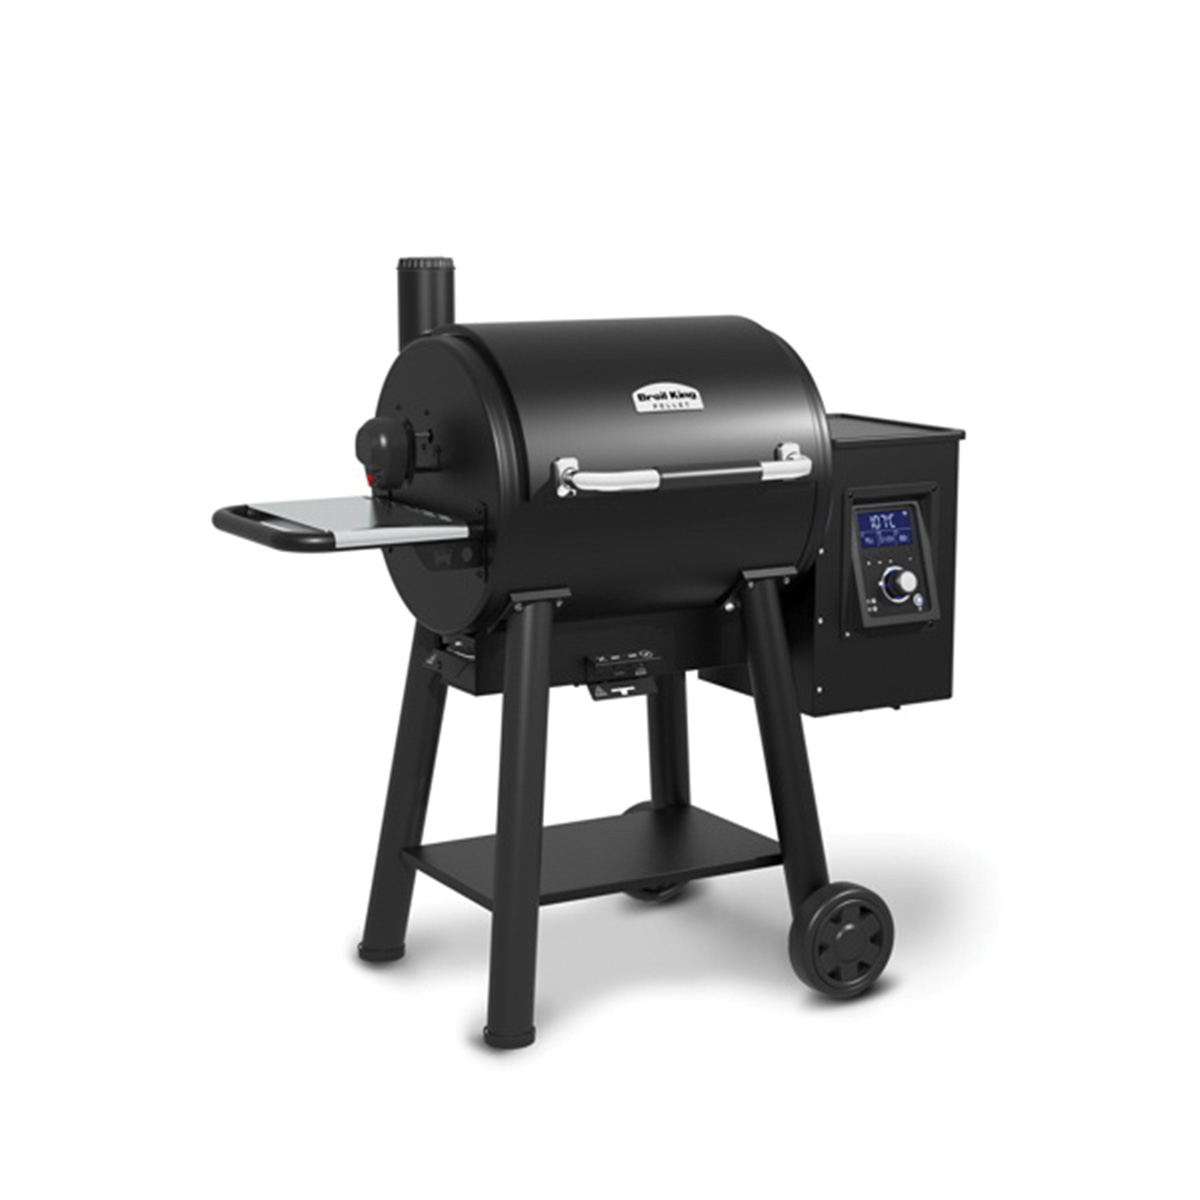 Broil King Regal Pellet 400 Series 495051 Pellet Grill, 500 sq-in Primary Cooking Surface, Smoker Included: Yes, Black - 2